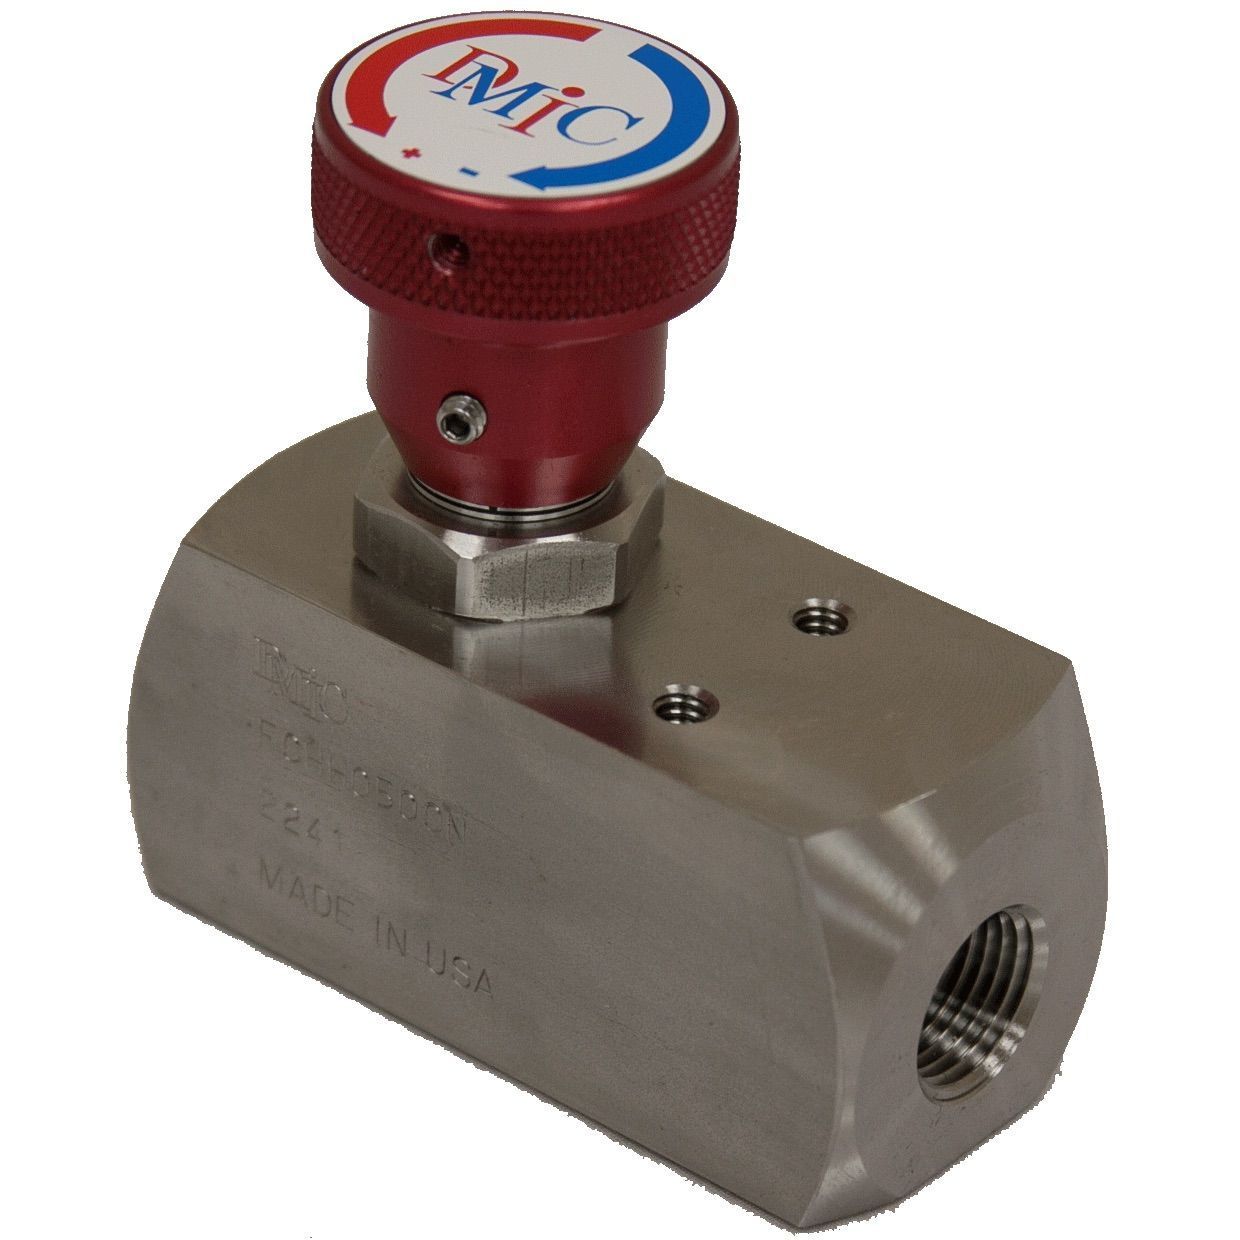 FCHH-0750N-1141 : DMIC Flow Control, Unidirectional, with Integrated Check, 3/4" NPT, Carbon Steel, 10000psi